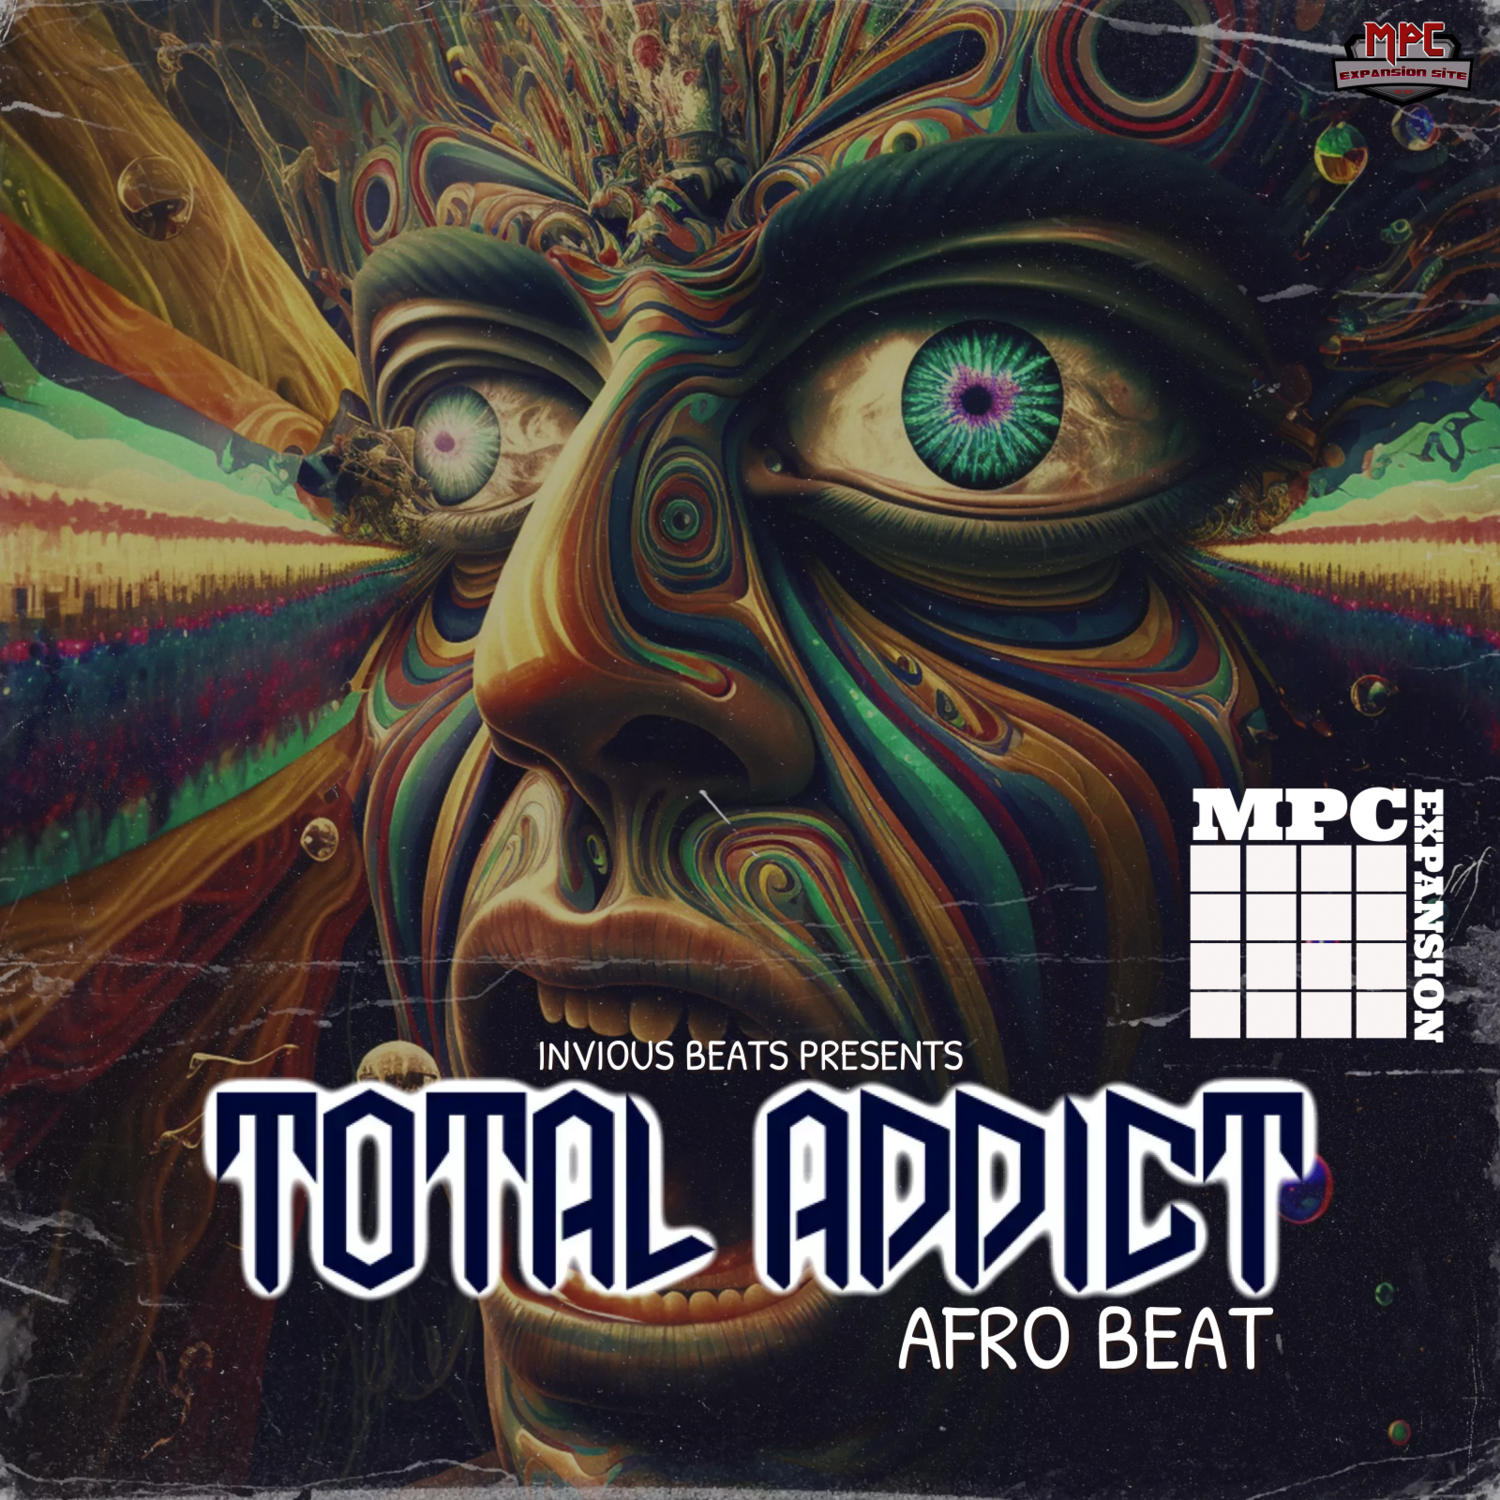 MPC EXPANSION 'TOTAL ADDICT' by INVIOUS